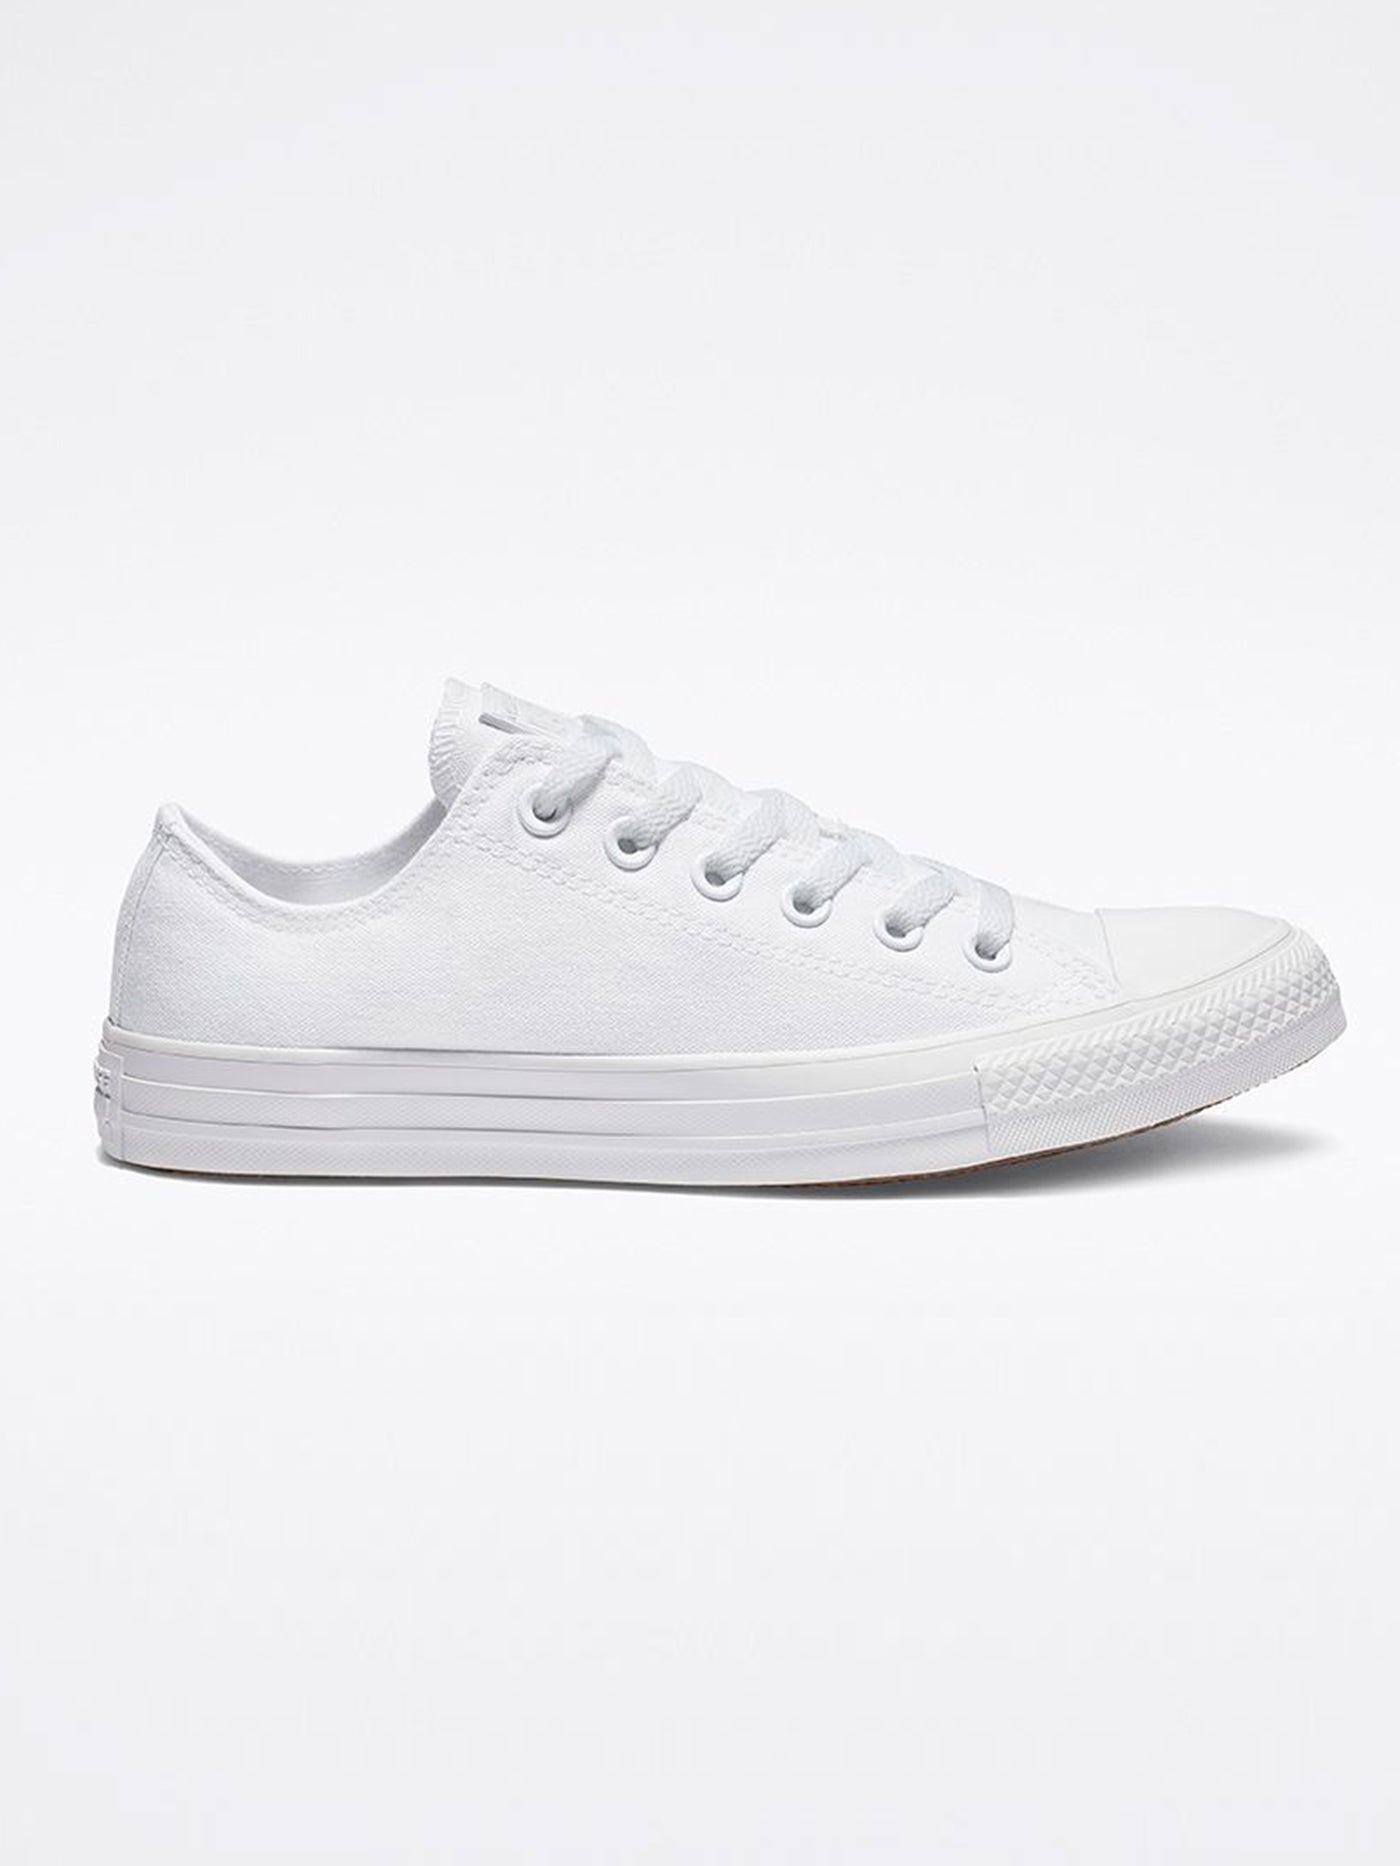 Converse Chuck Taylor All Star Mono Canvas Low White Shoes